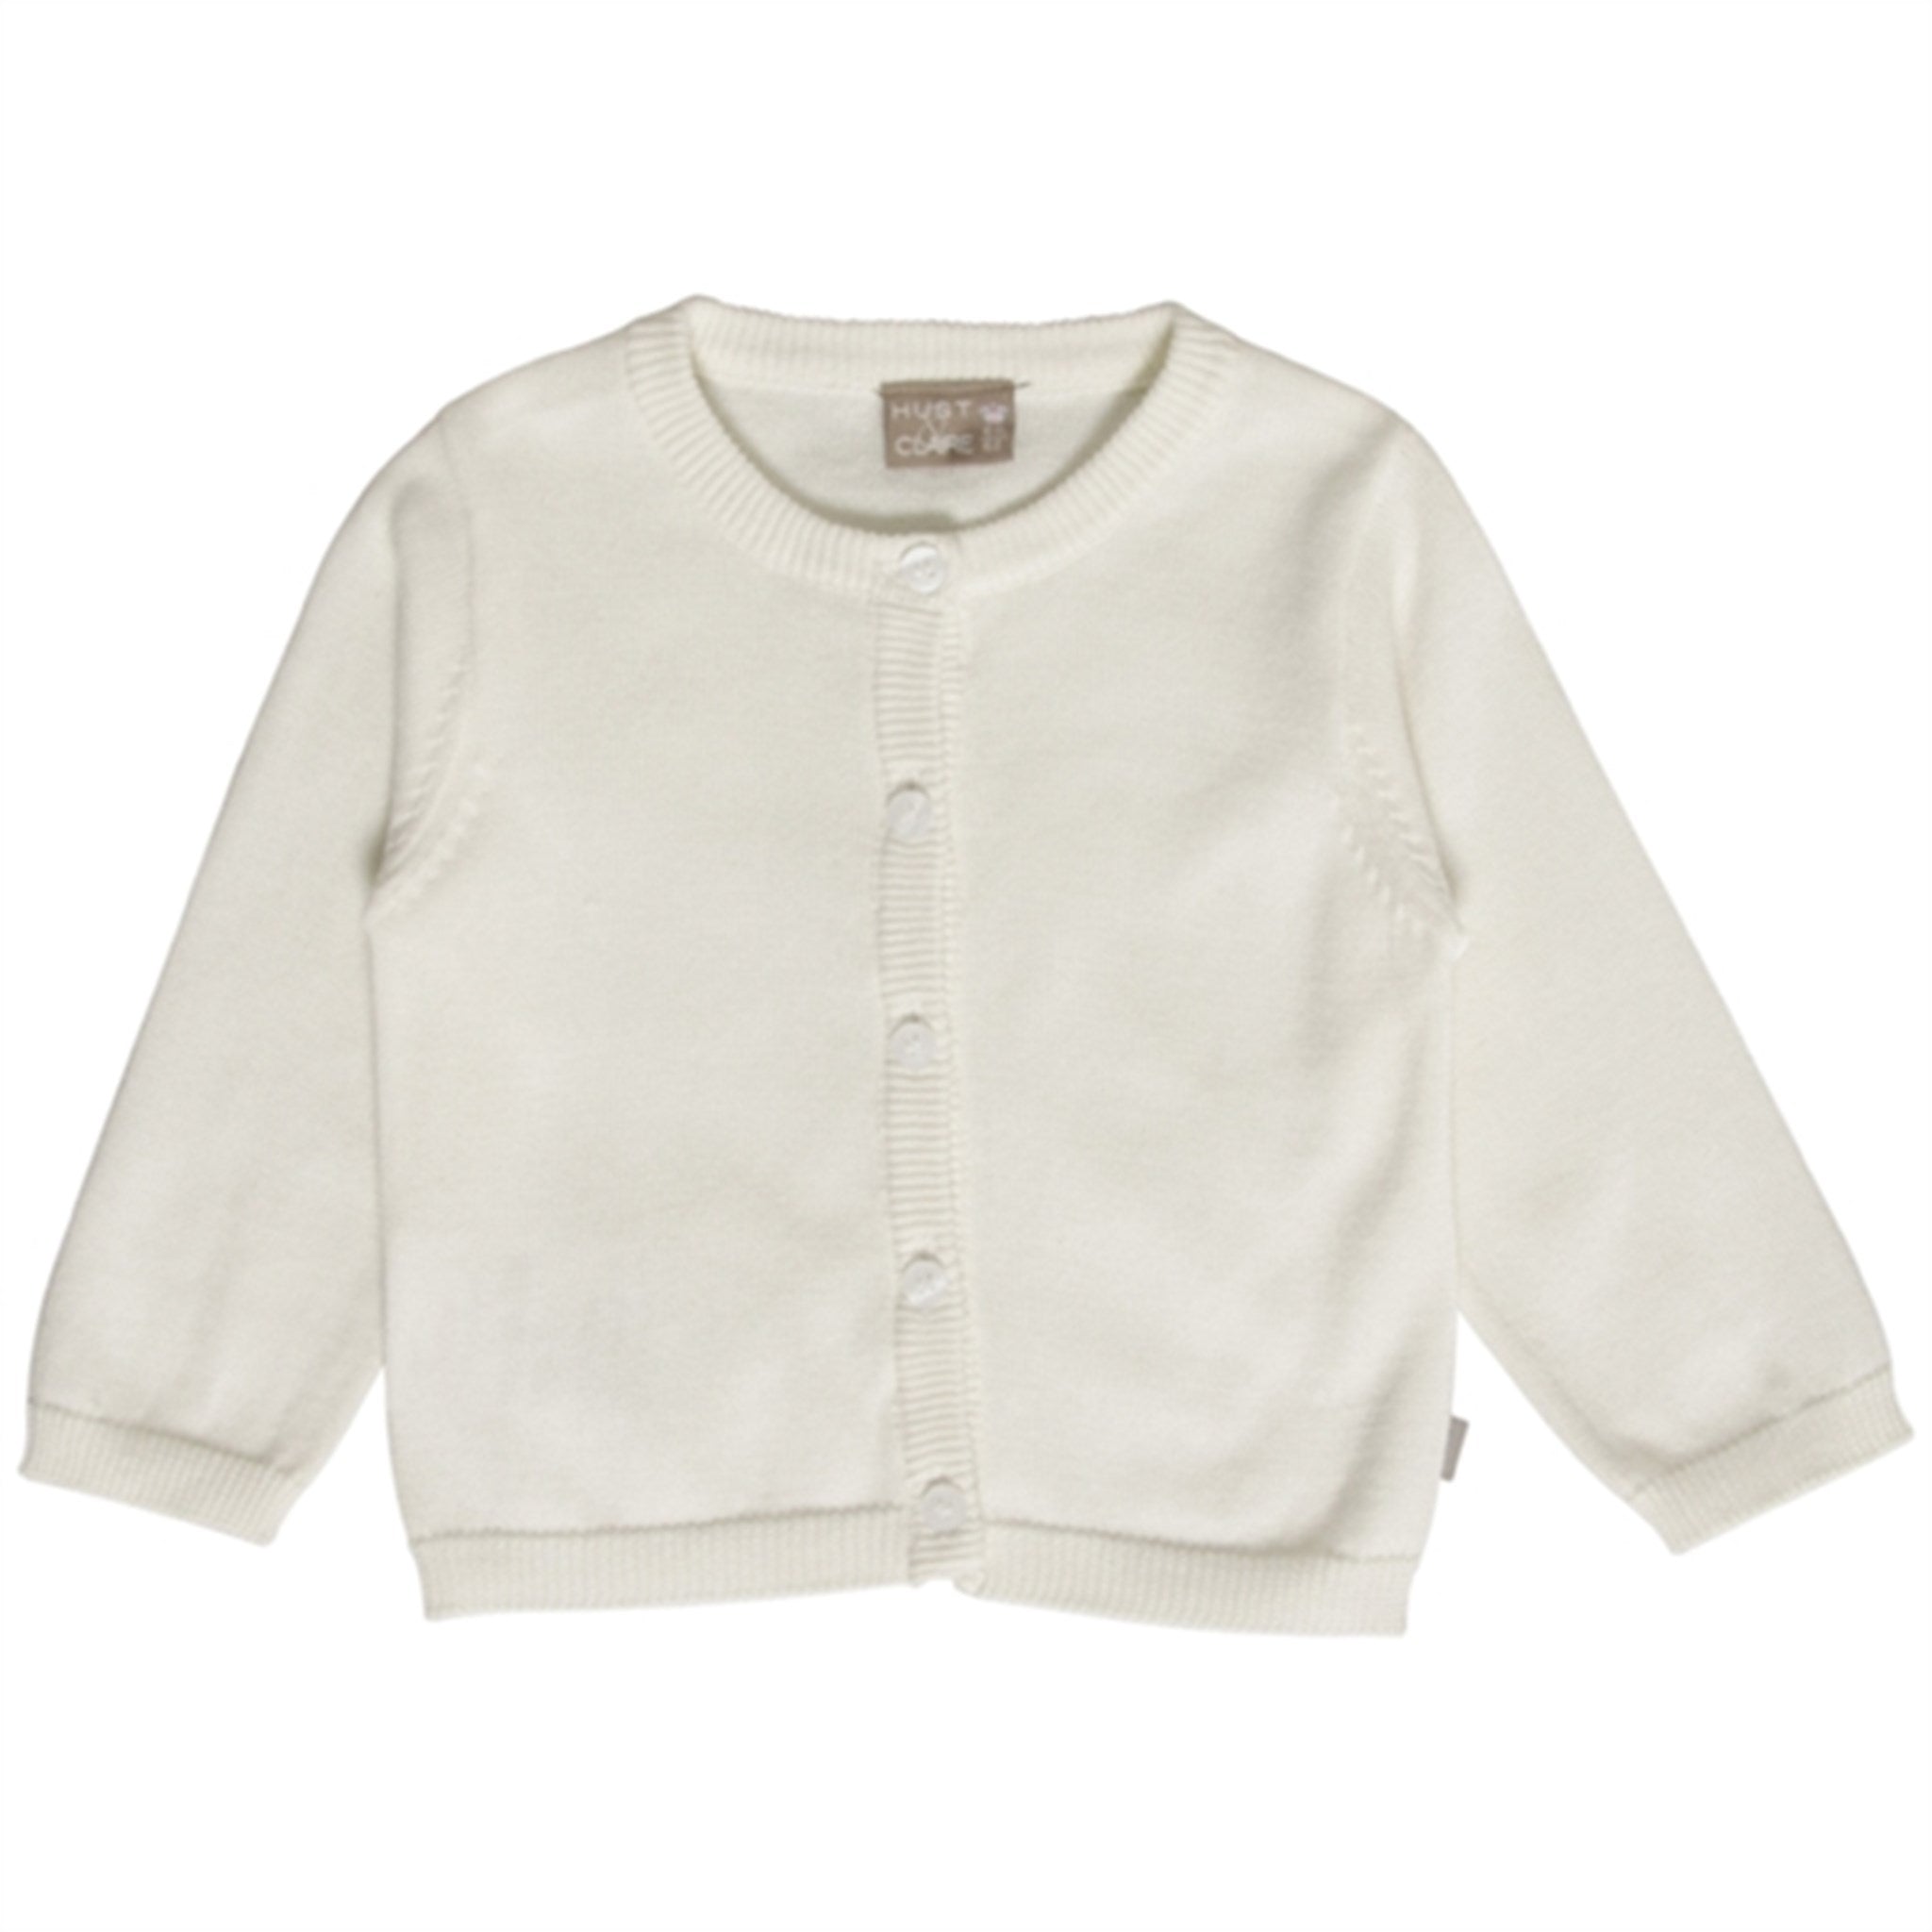 Hust & Claire Baby Ivory Claire Cardigan NOOS - Str. 50